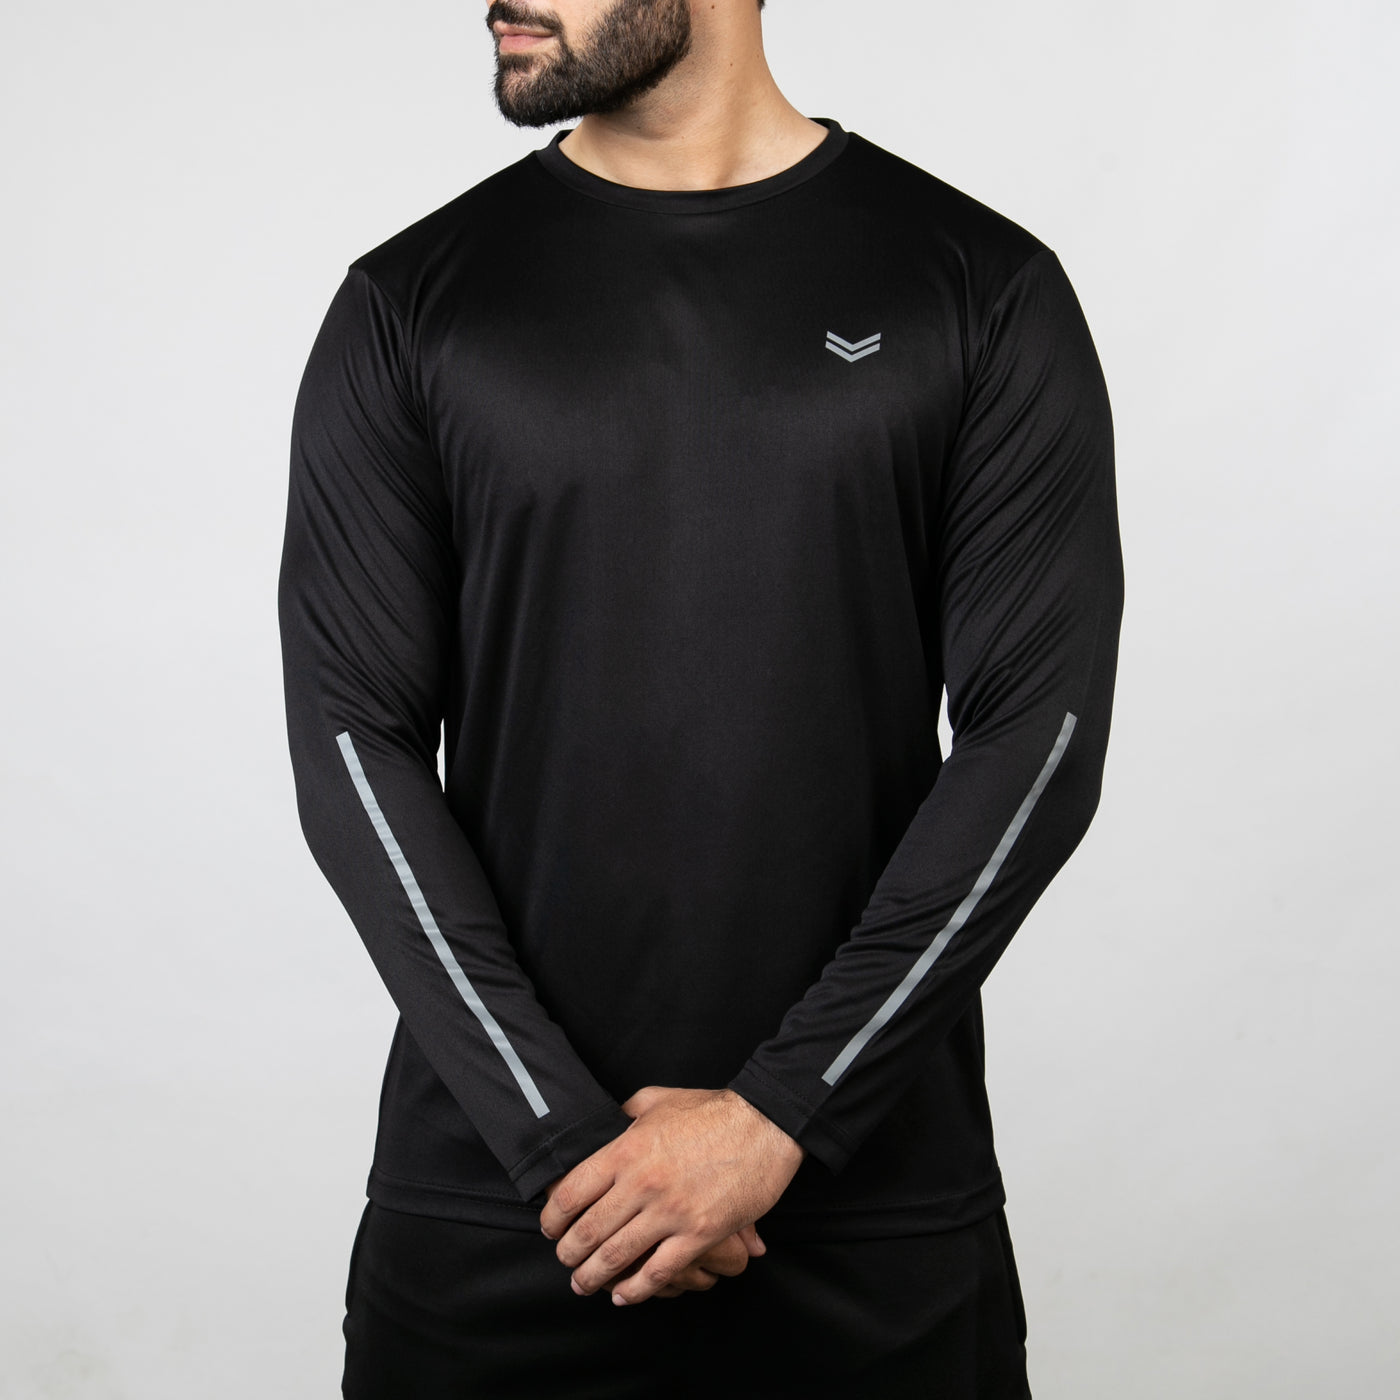 Premium Black Quick Dry Full Sleeves T-Shirt with Forearm Reflectors